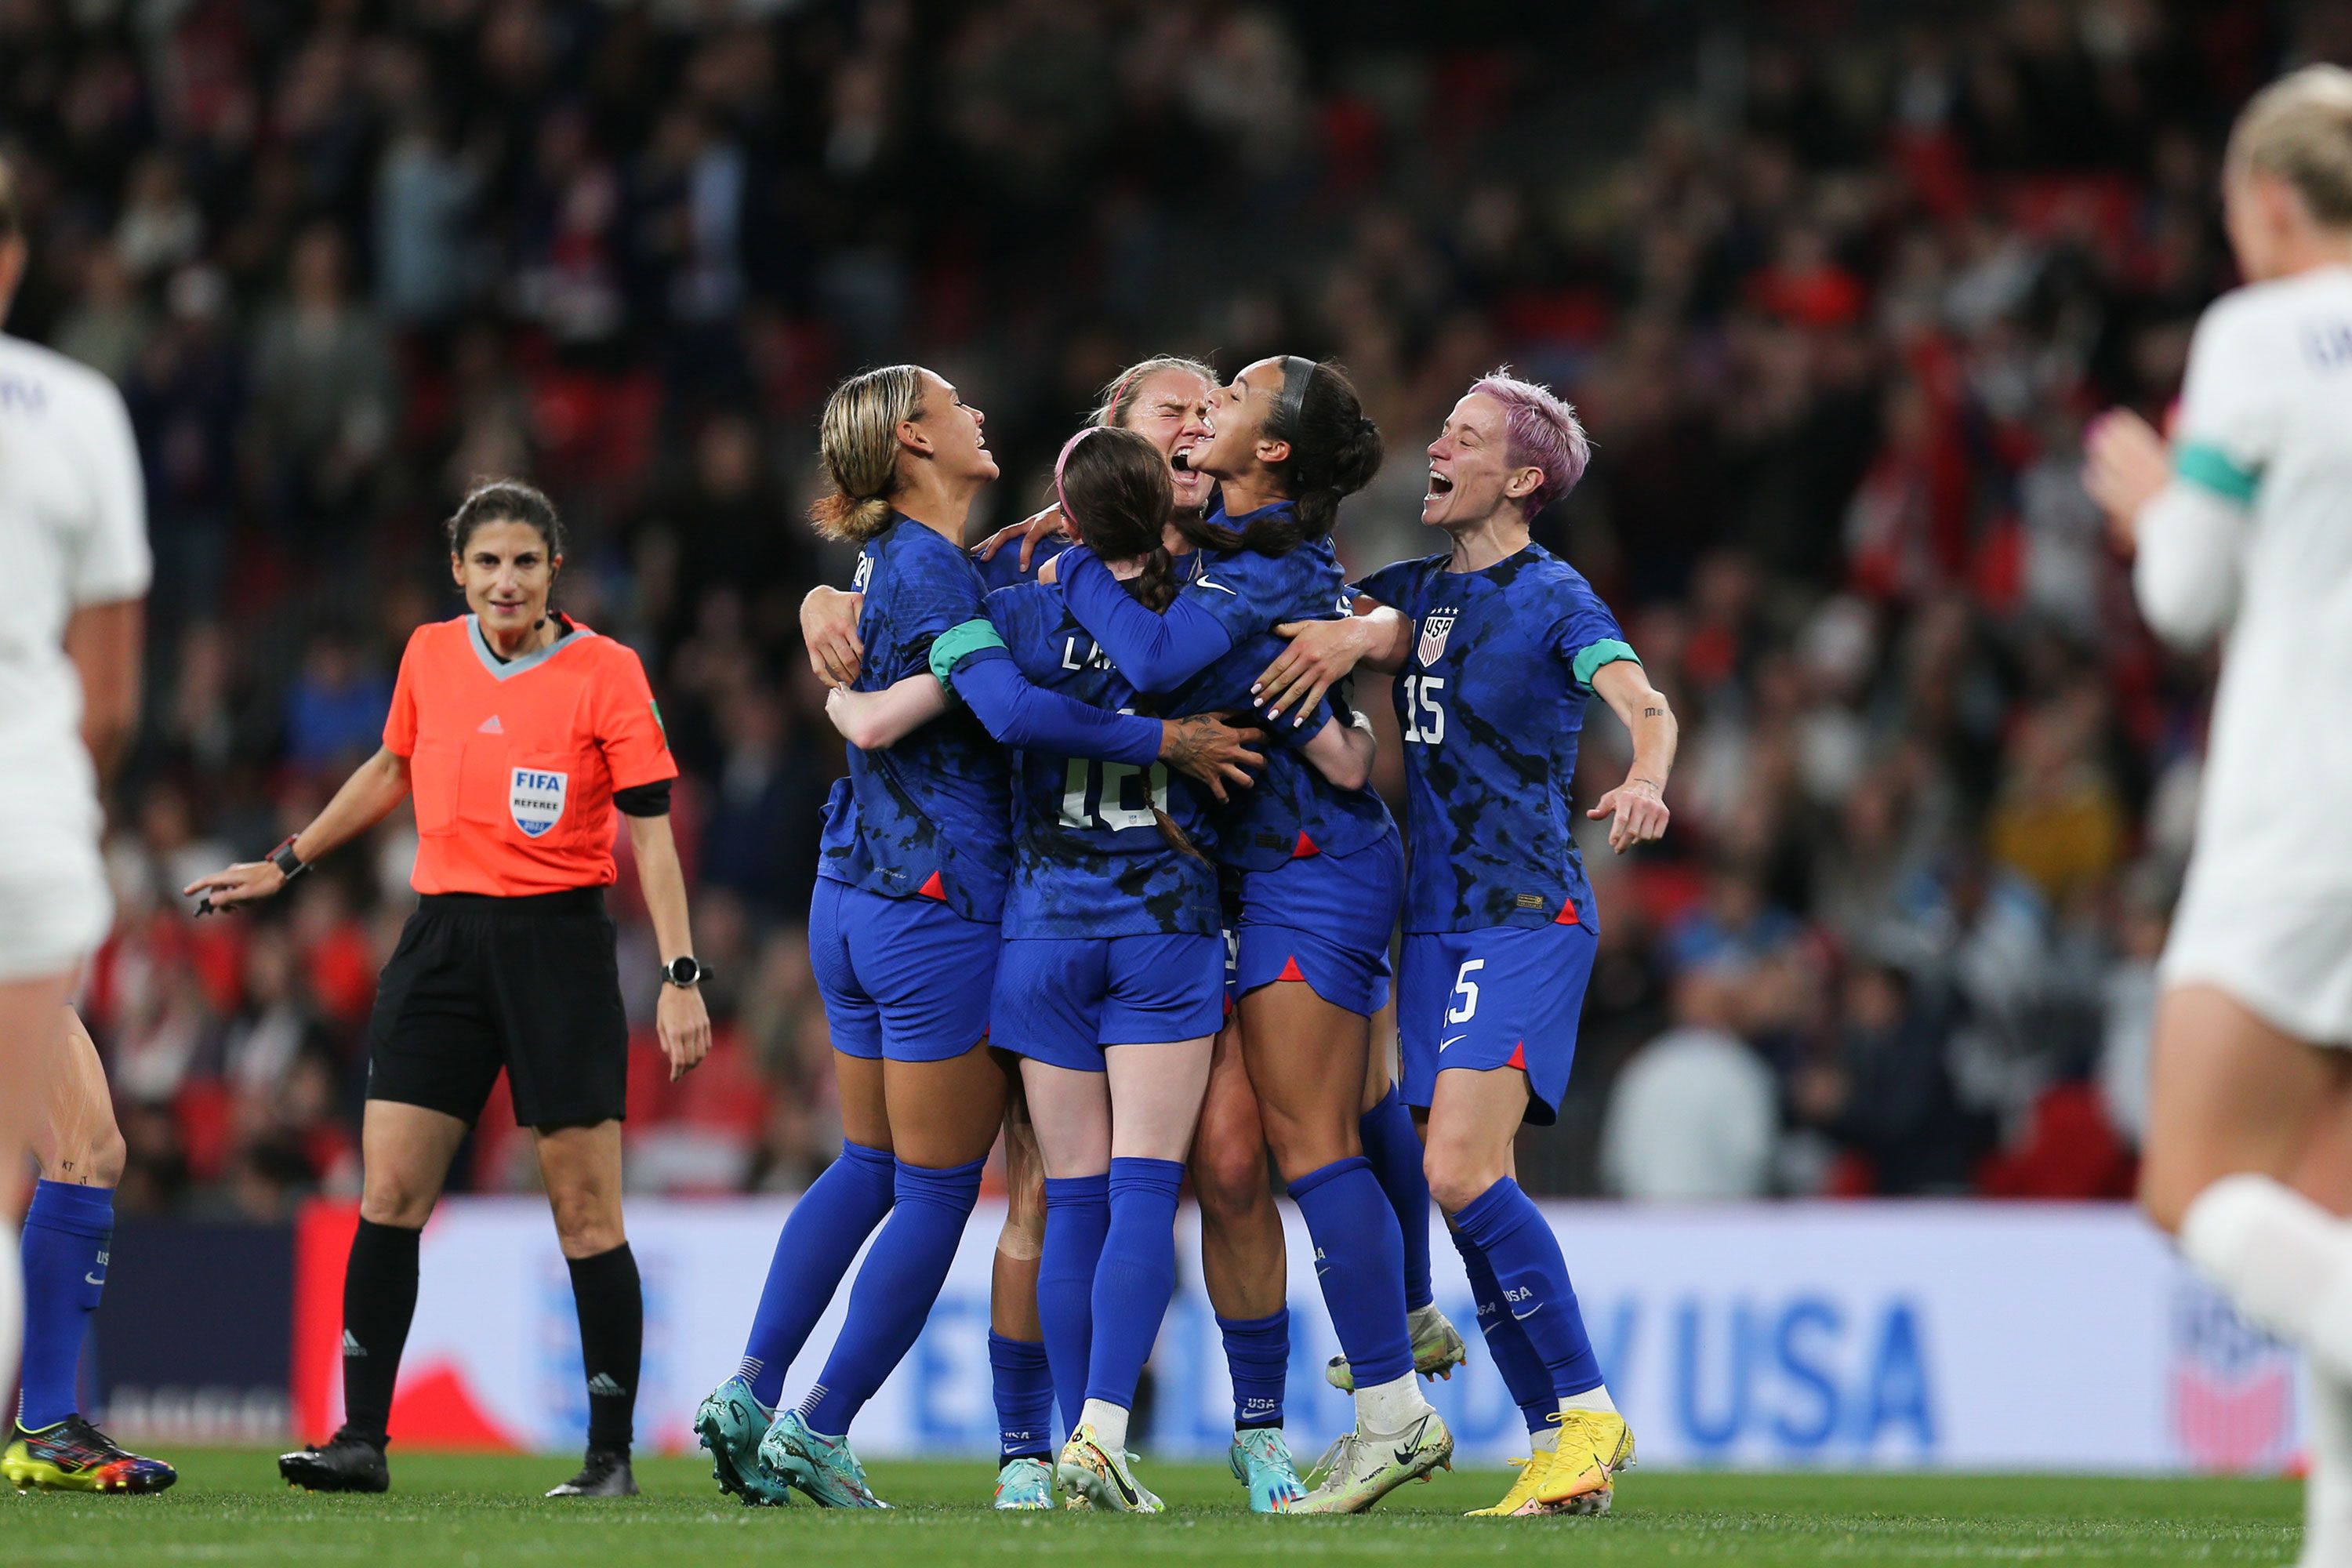 US women's national team to embrace 'adversity' at sold-out Wembley friendly